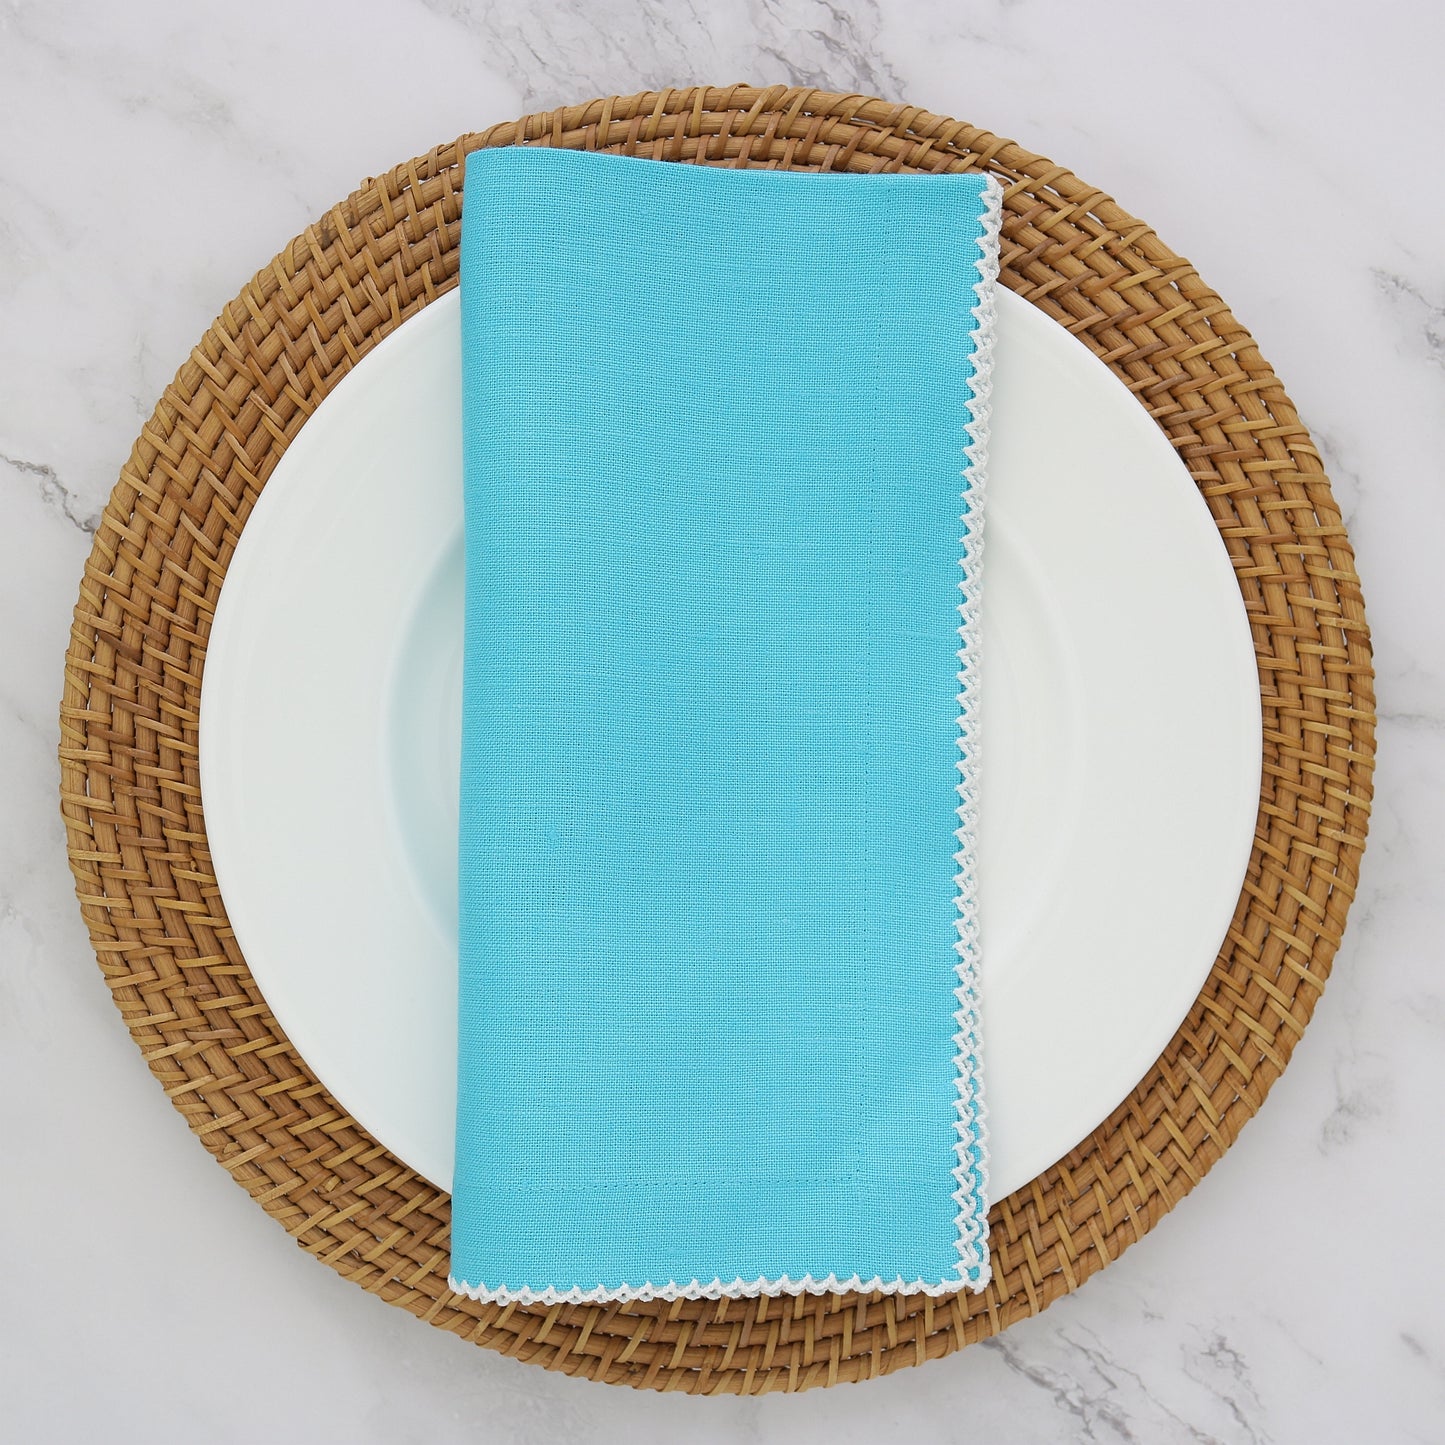 Aqua napkin with white picot trim on plate with charger